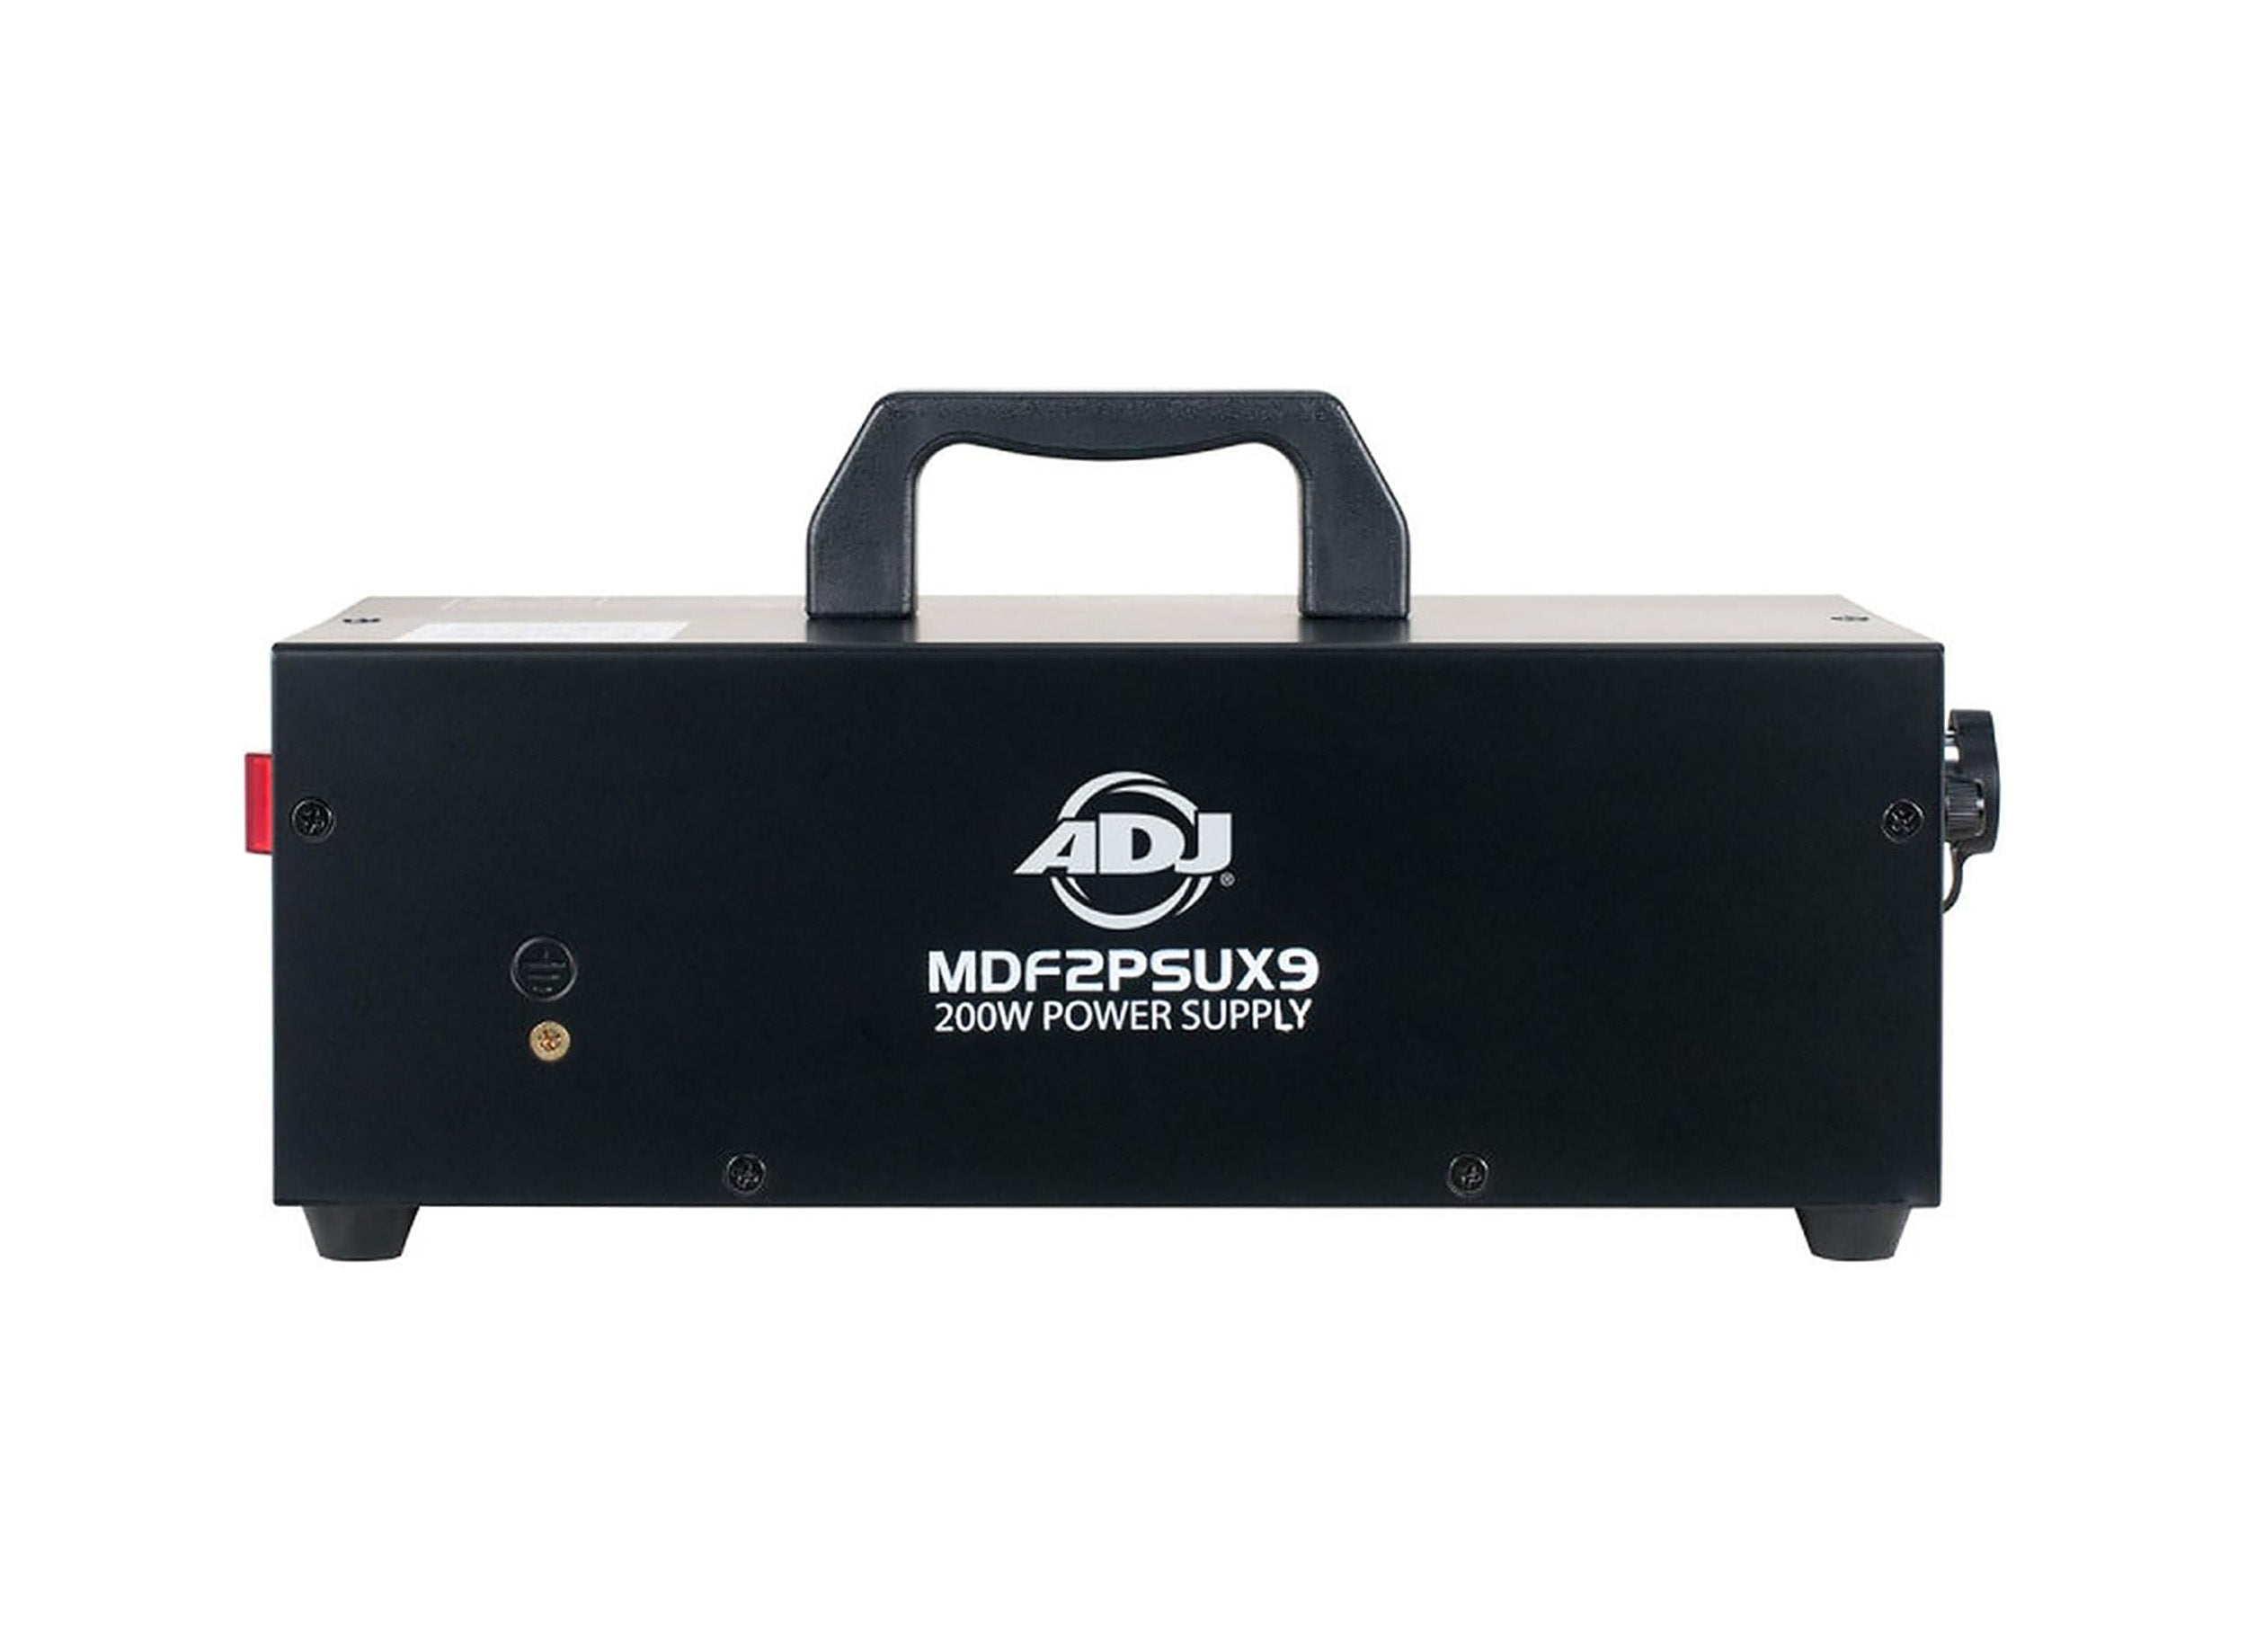 ADJ MDF2 PSUX9, Power Supply for Up To 9 MDF2 LED Dance Floor Panels by ADJ